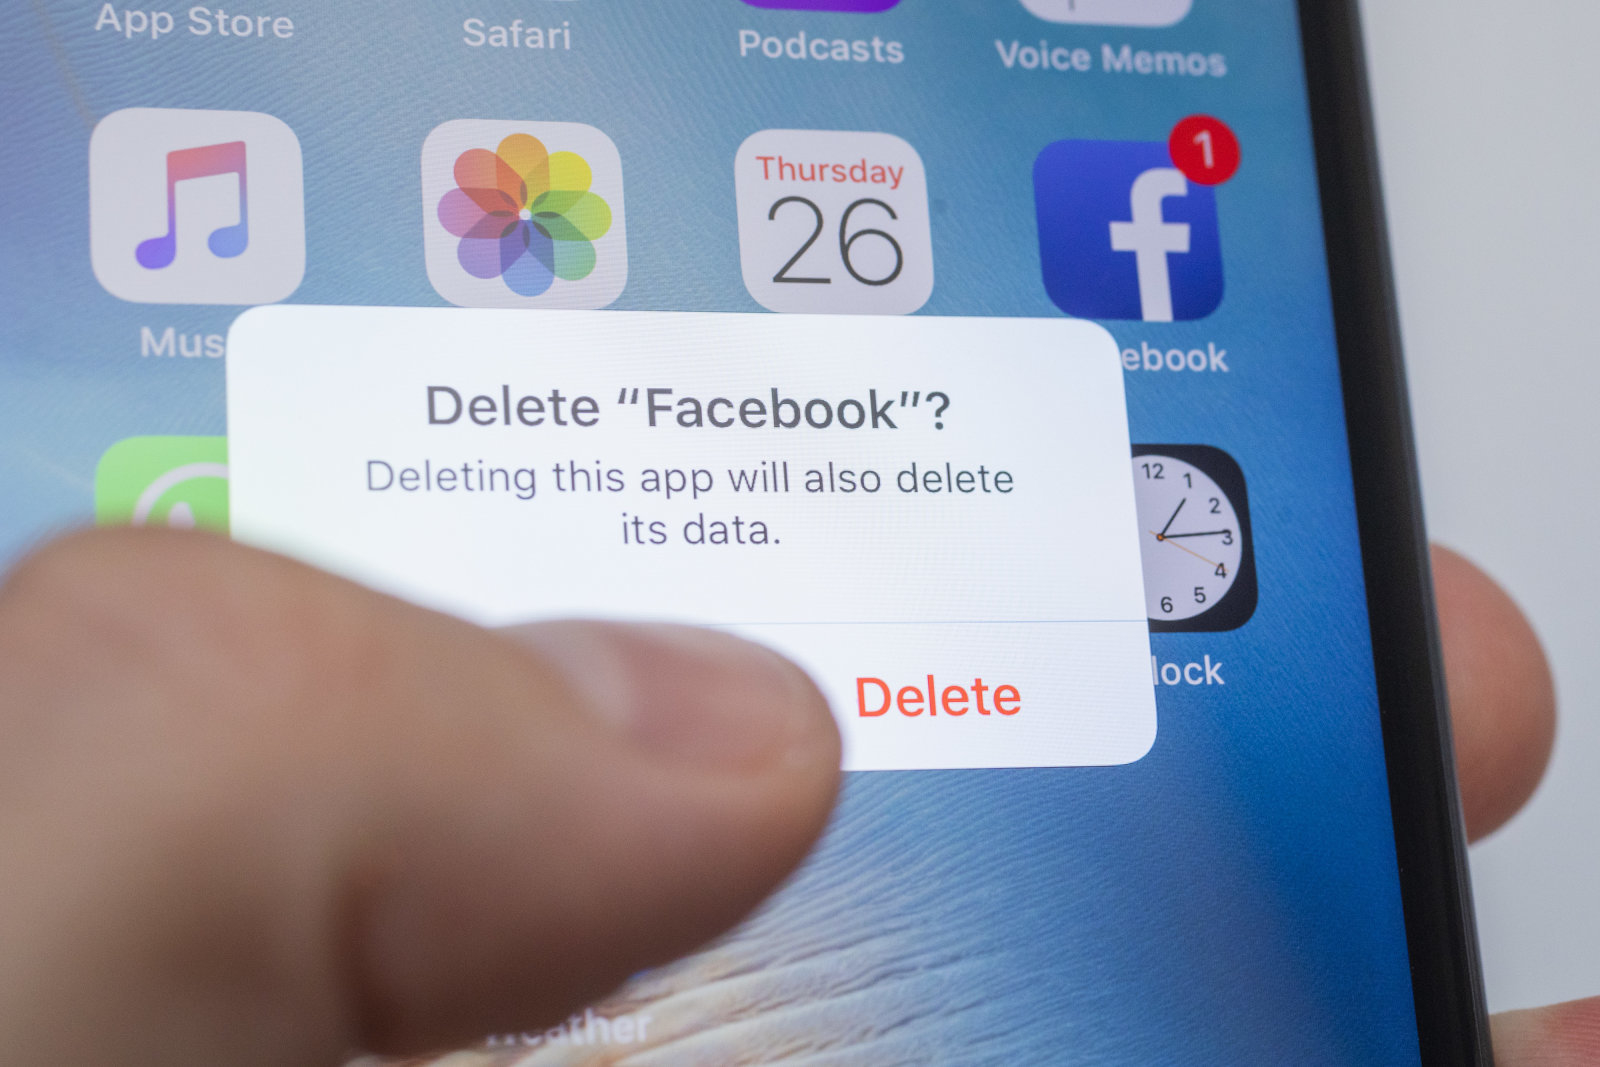 Facebook extends account deletion grace period to 30 days | TechSpot Forums